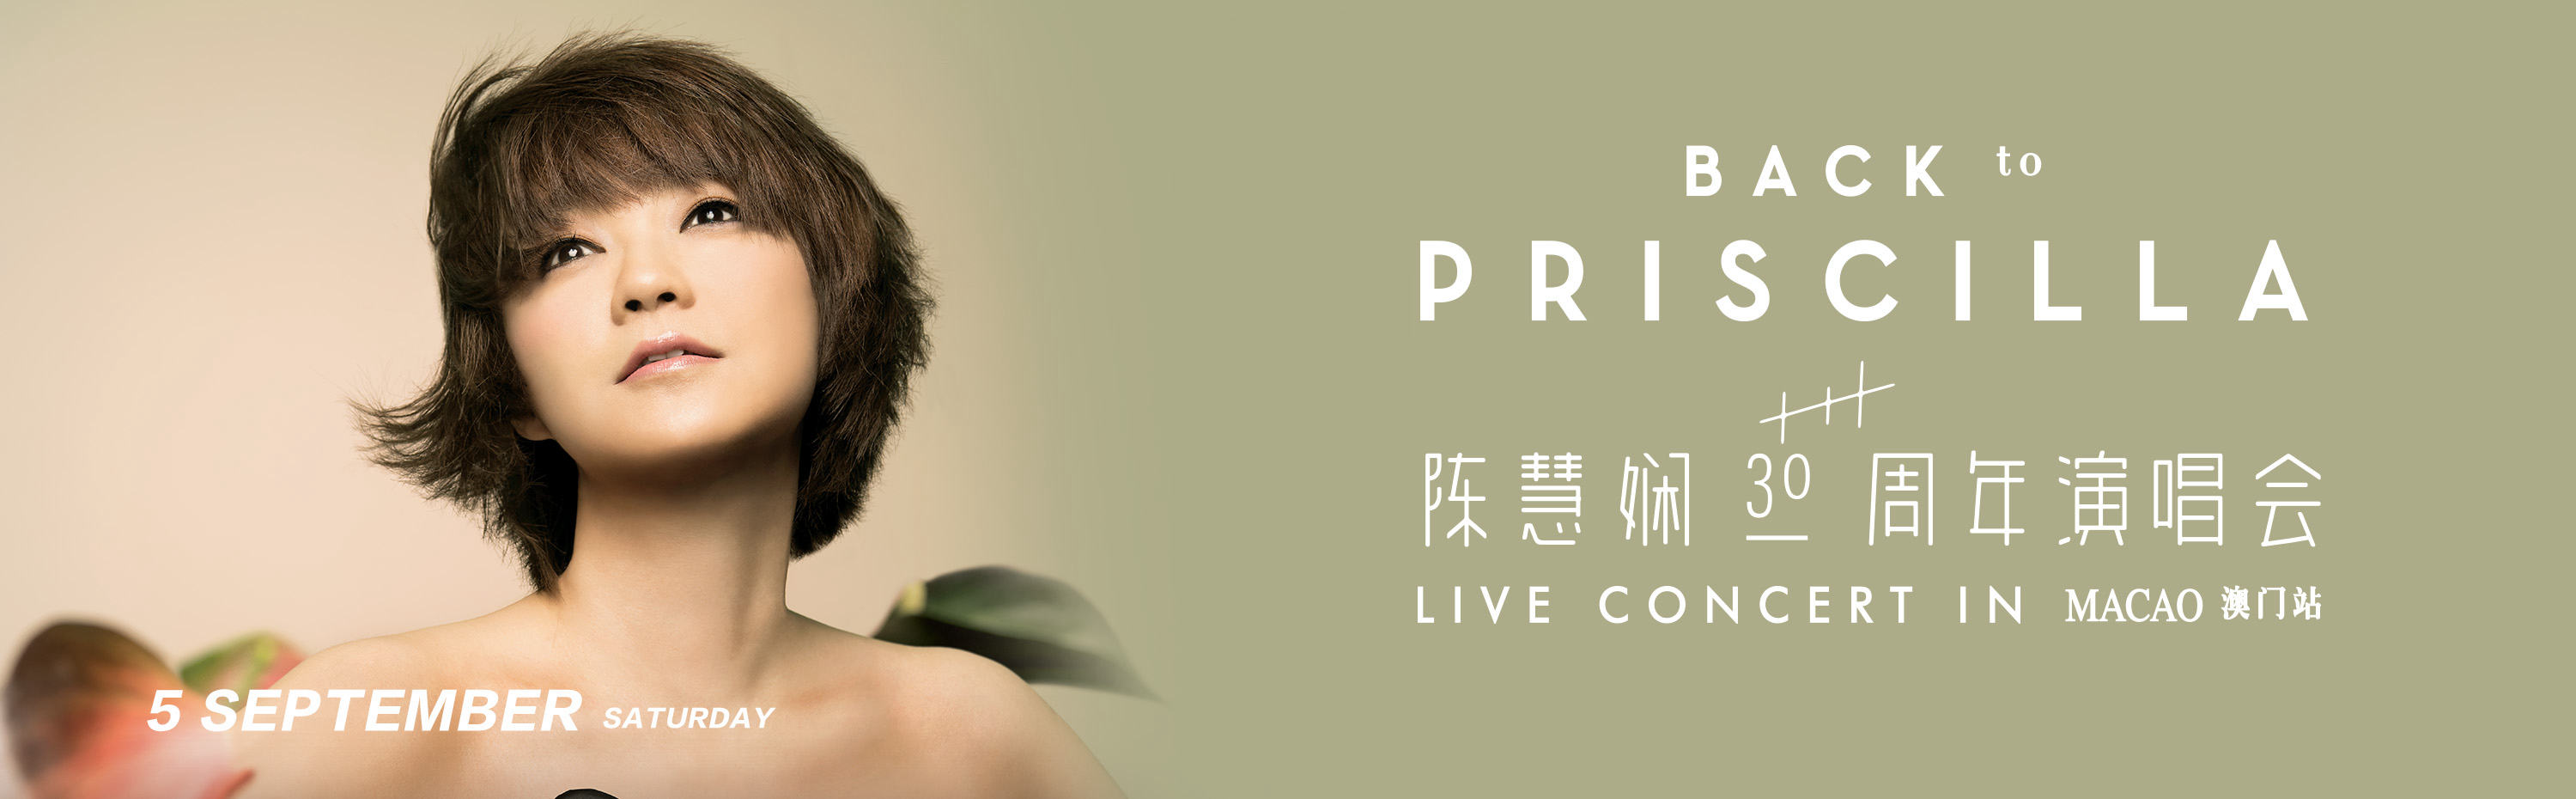 Back to Priscilla Live Concert in Macao